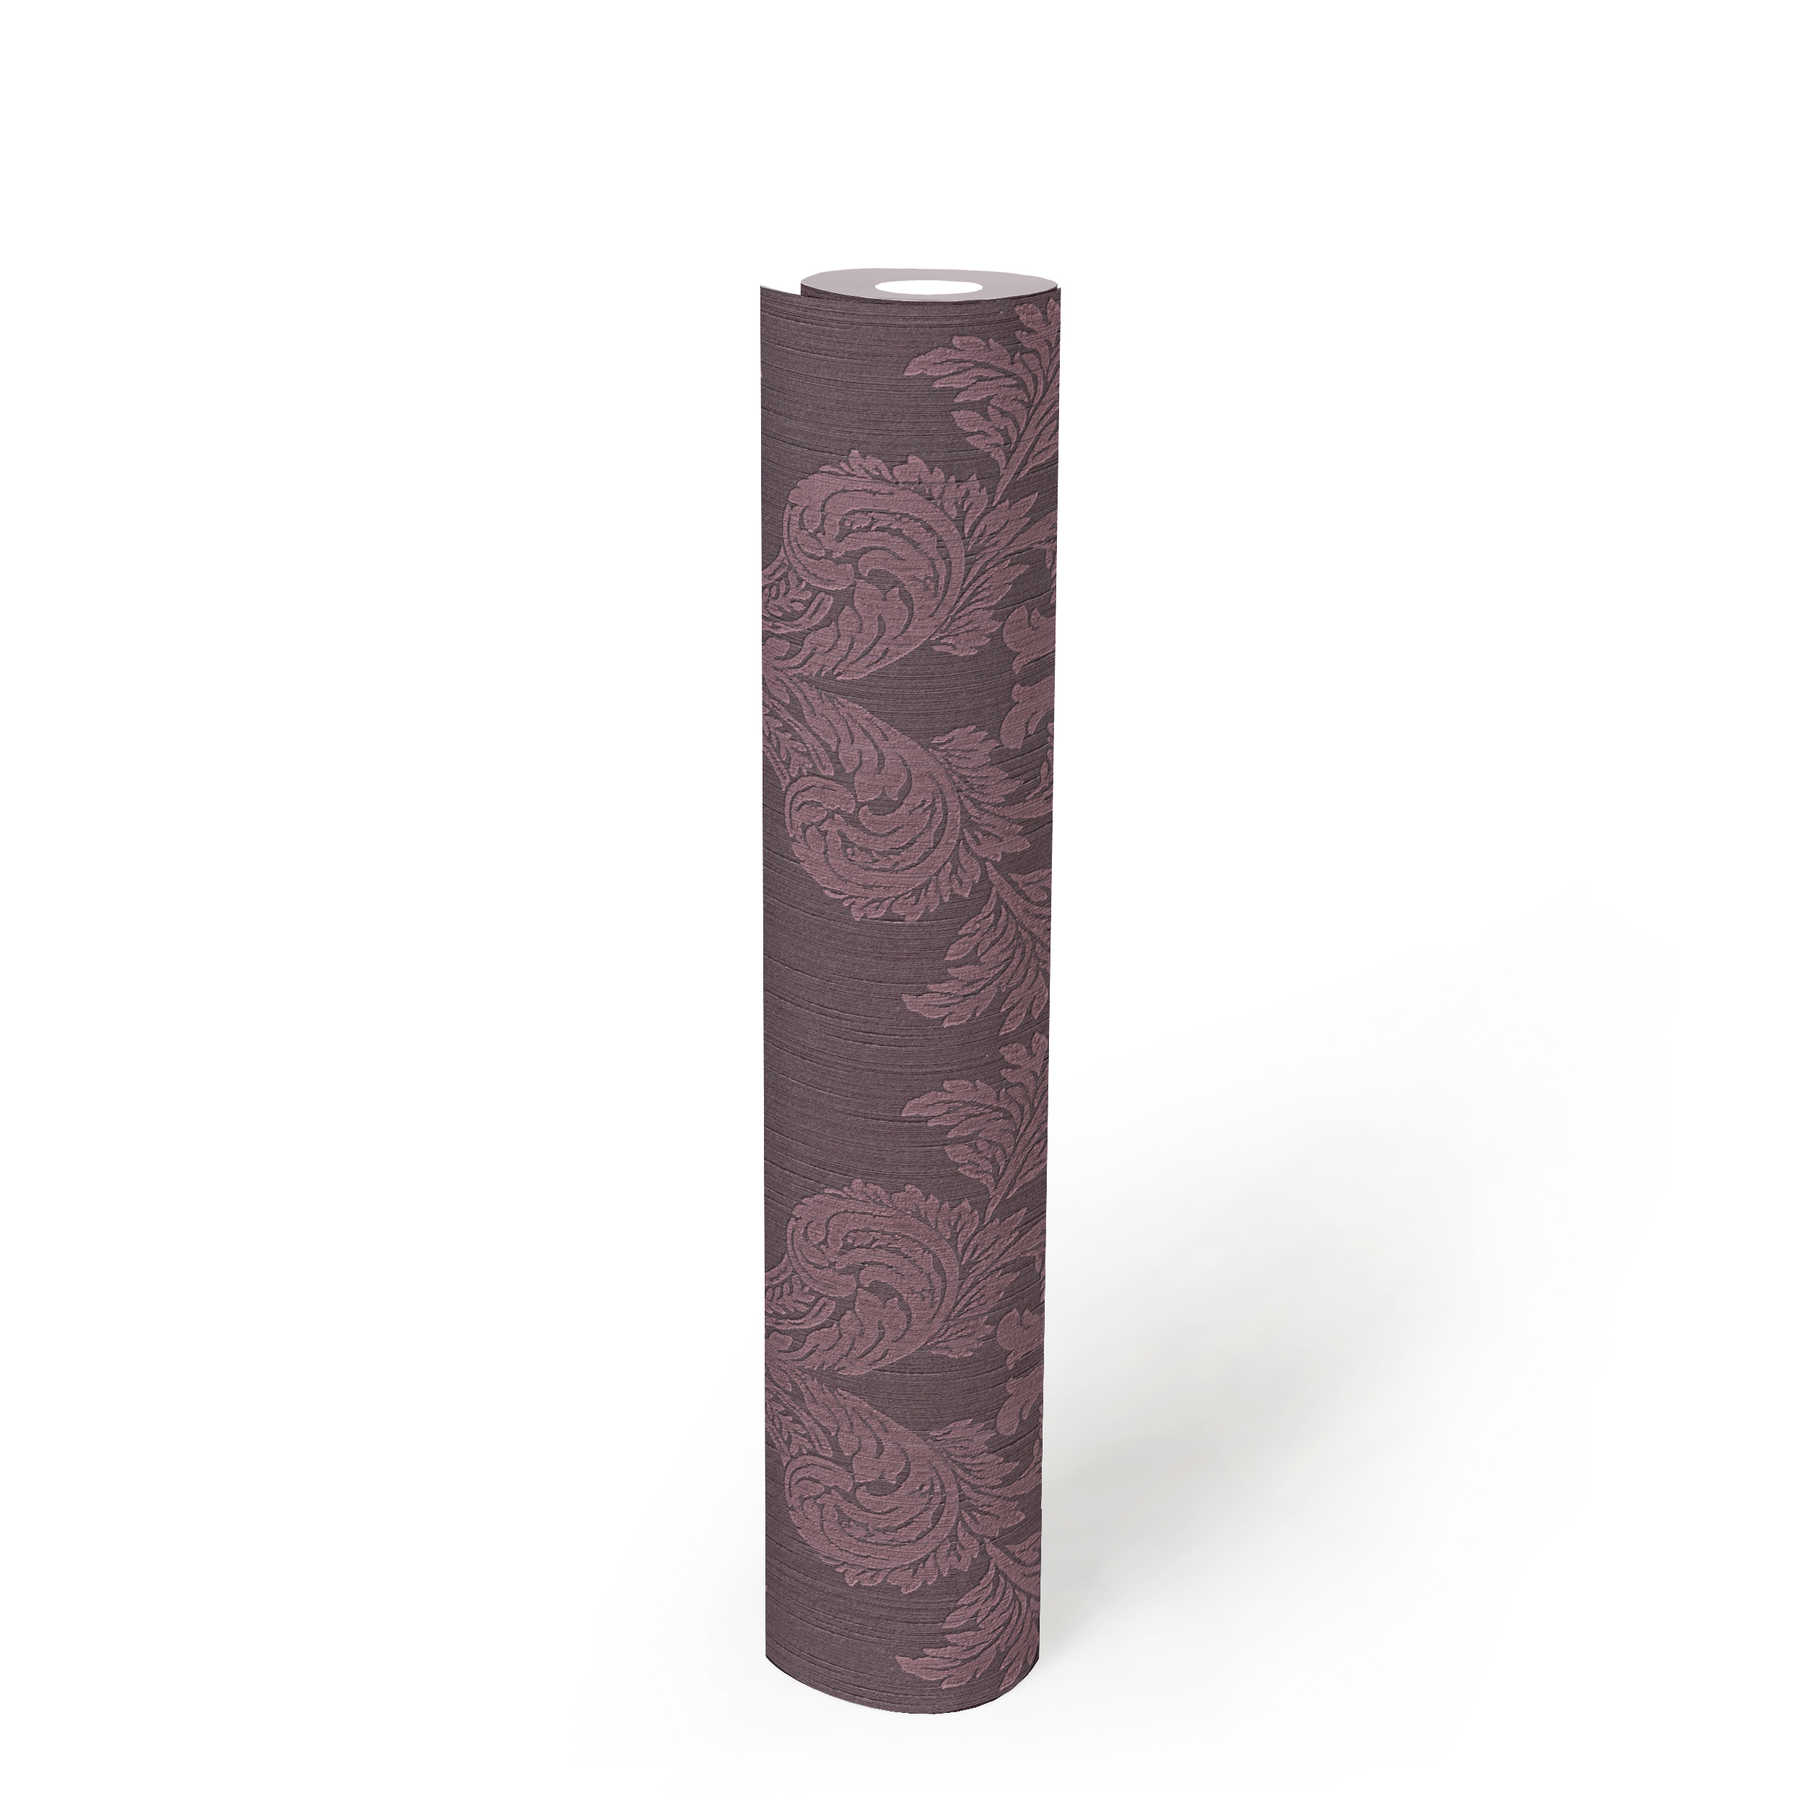             Wallpaper with floral ornament pattern & texture effect - purple
        